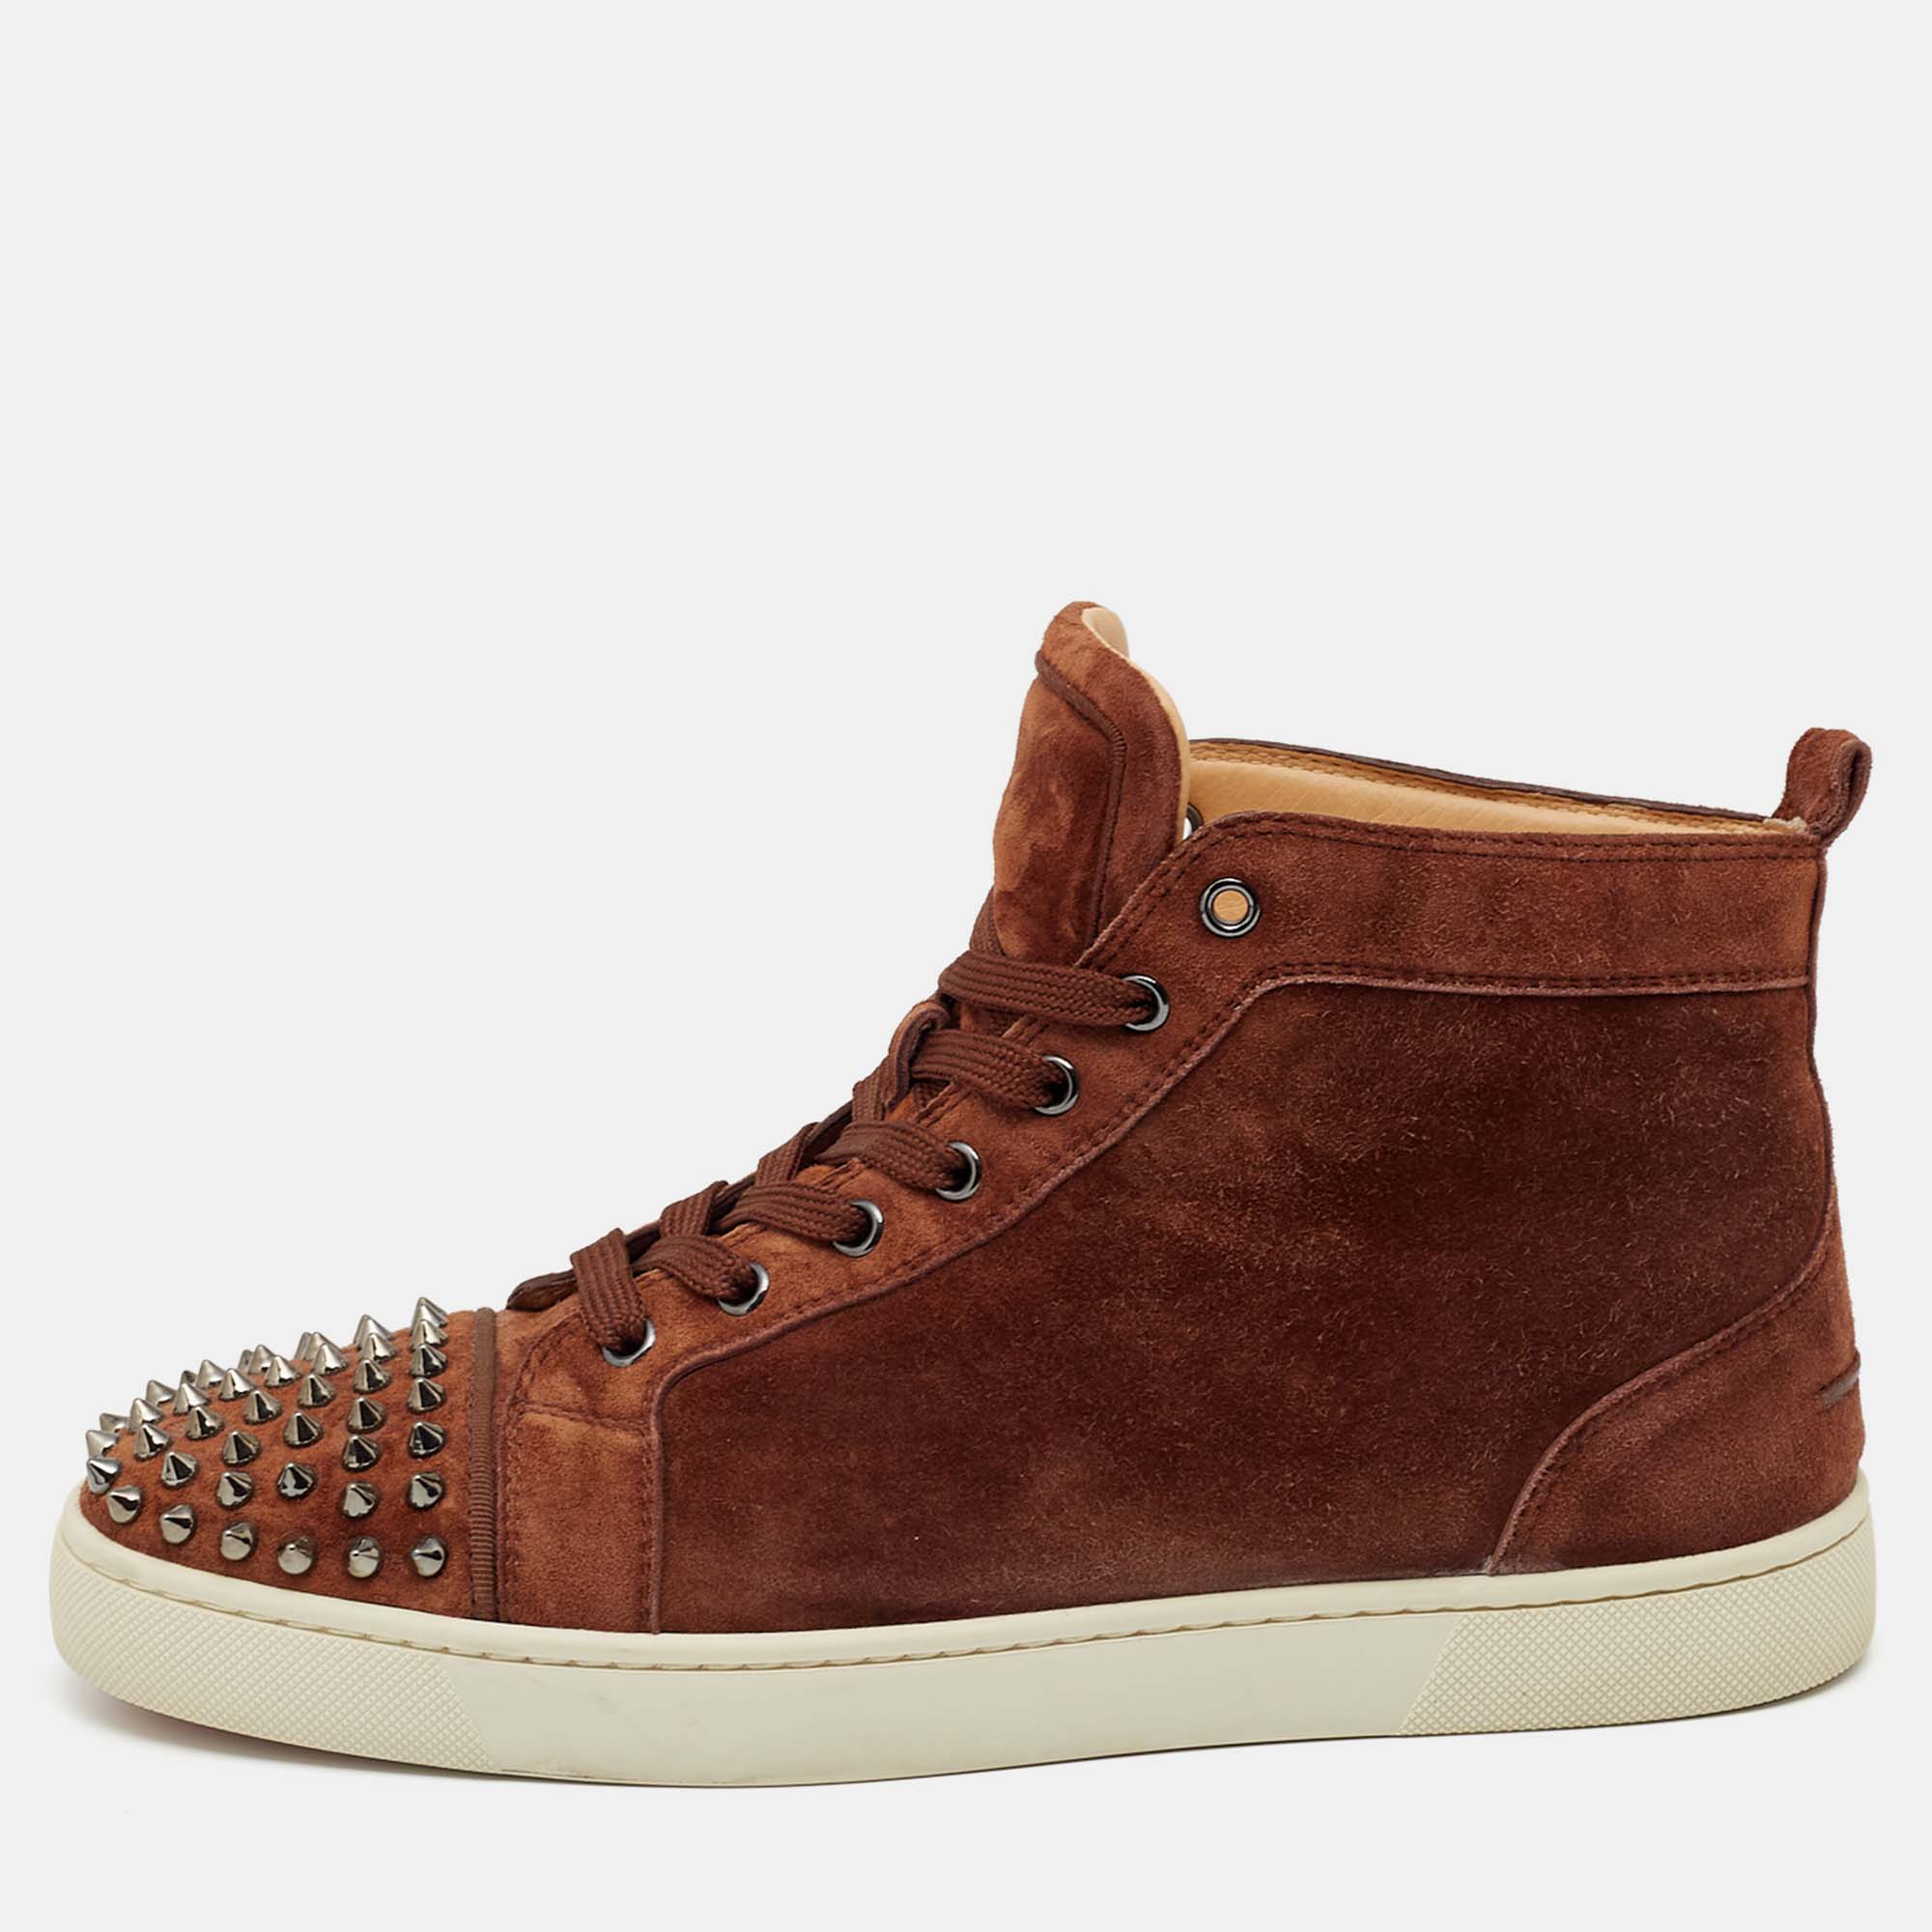 Lou Spikes - High-top sneakers - Suede - Black - Christian